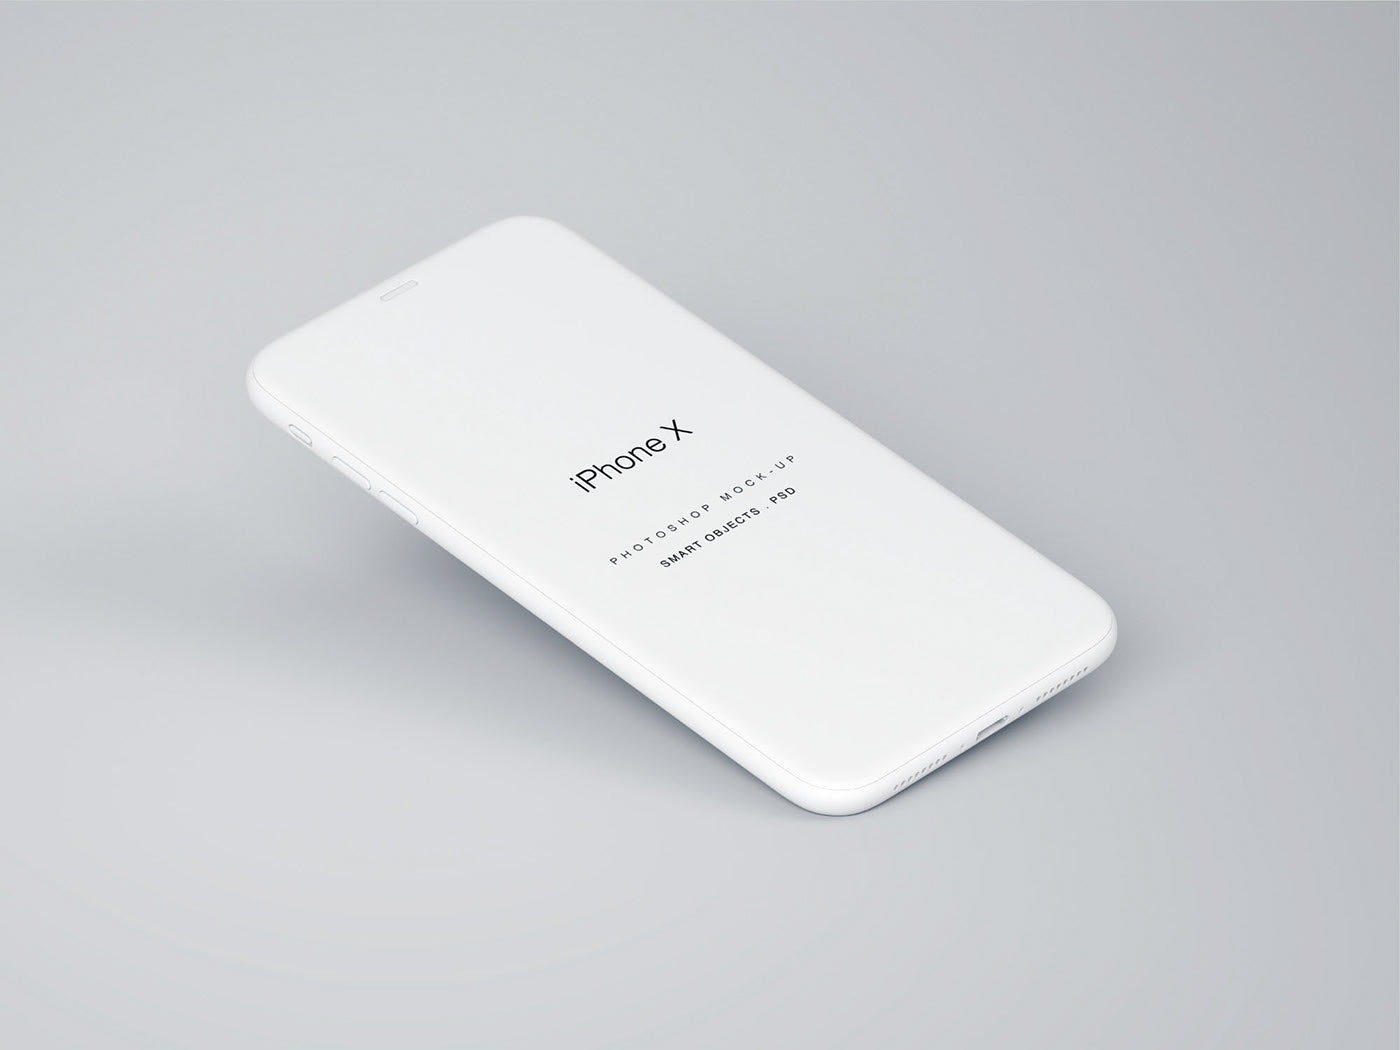 Download Free Perspective iPhone X Mockup PSD - CreativeBooster